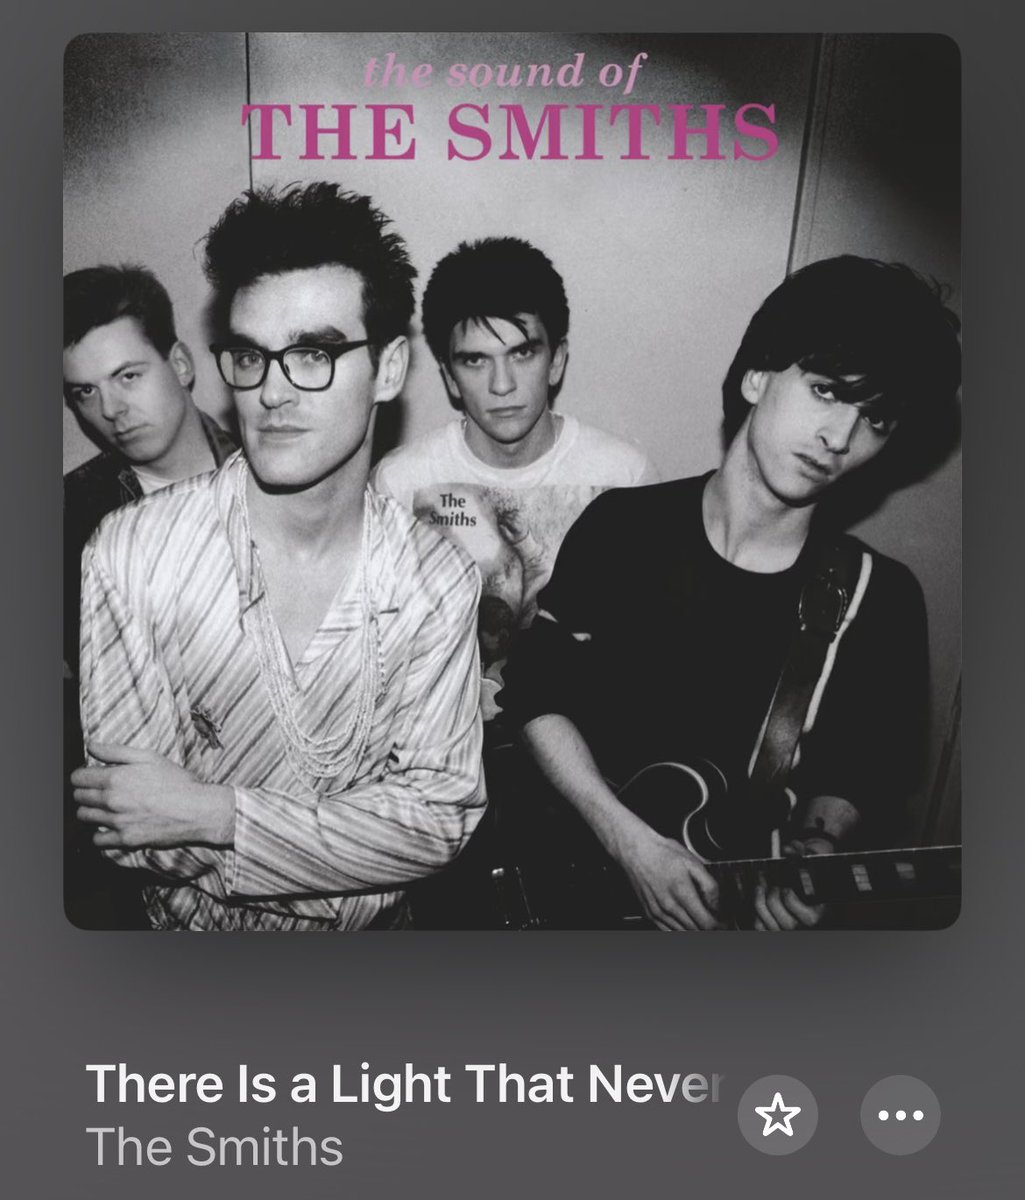 #bbcgms there is a light that never goes out by the Smiths , was a pivotal moment , listened one night at a girlfriends house and thought what a band, liked The Smiths ever since